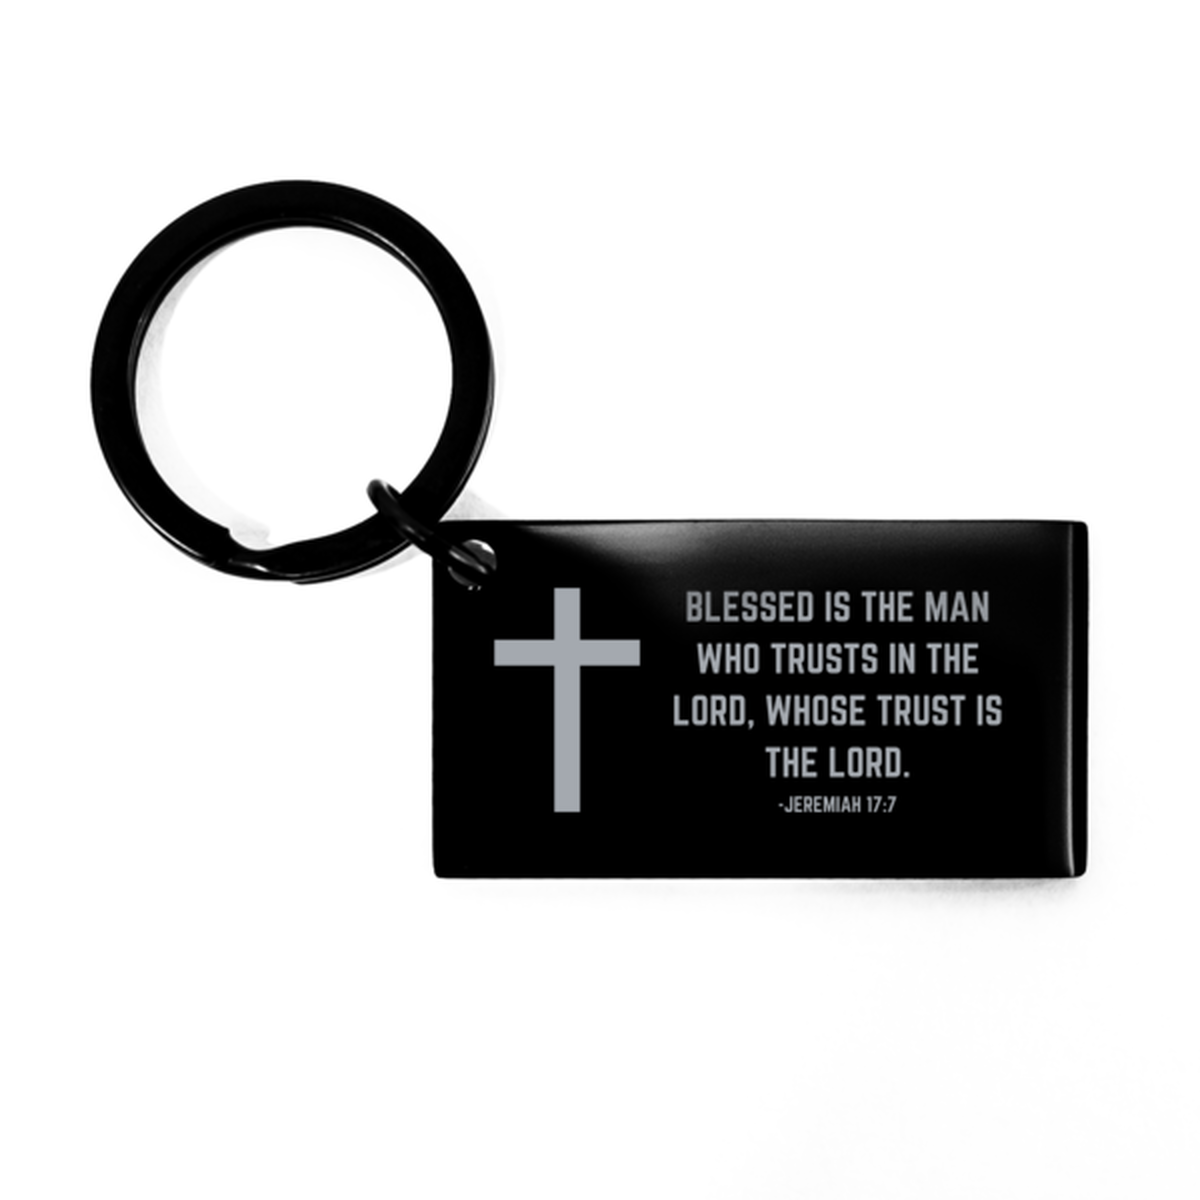 Baptism Gifts For Teenage Boys Girls, Christian Bible Verse Black Keychain, Blessed is the man who trusts, Confirmation Gifts, Bible Verse Keyring for Son, Godson, Grandson, Nephew